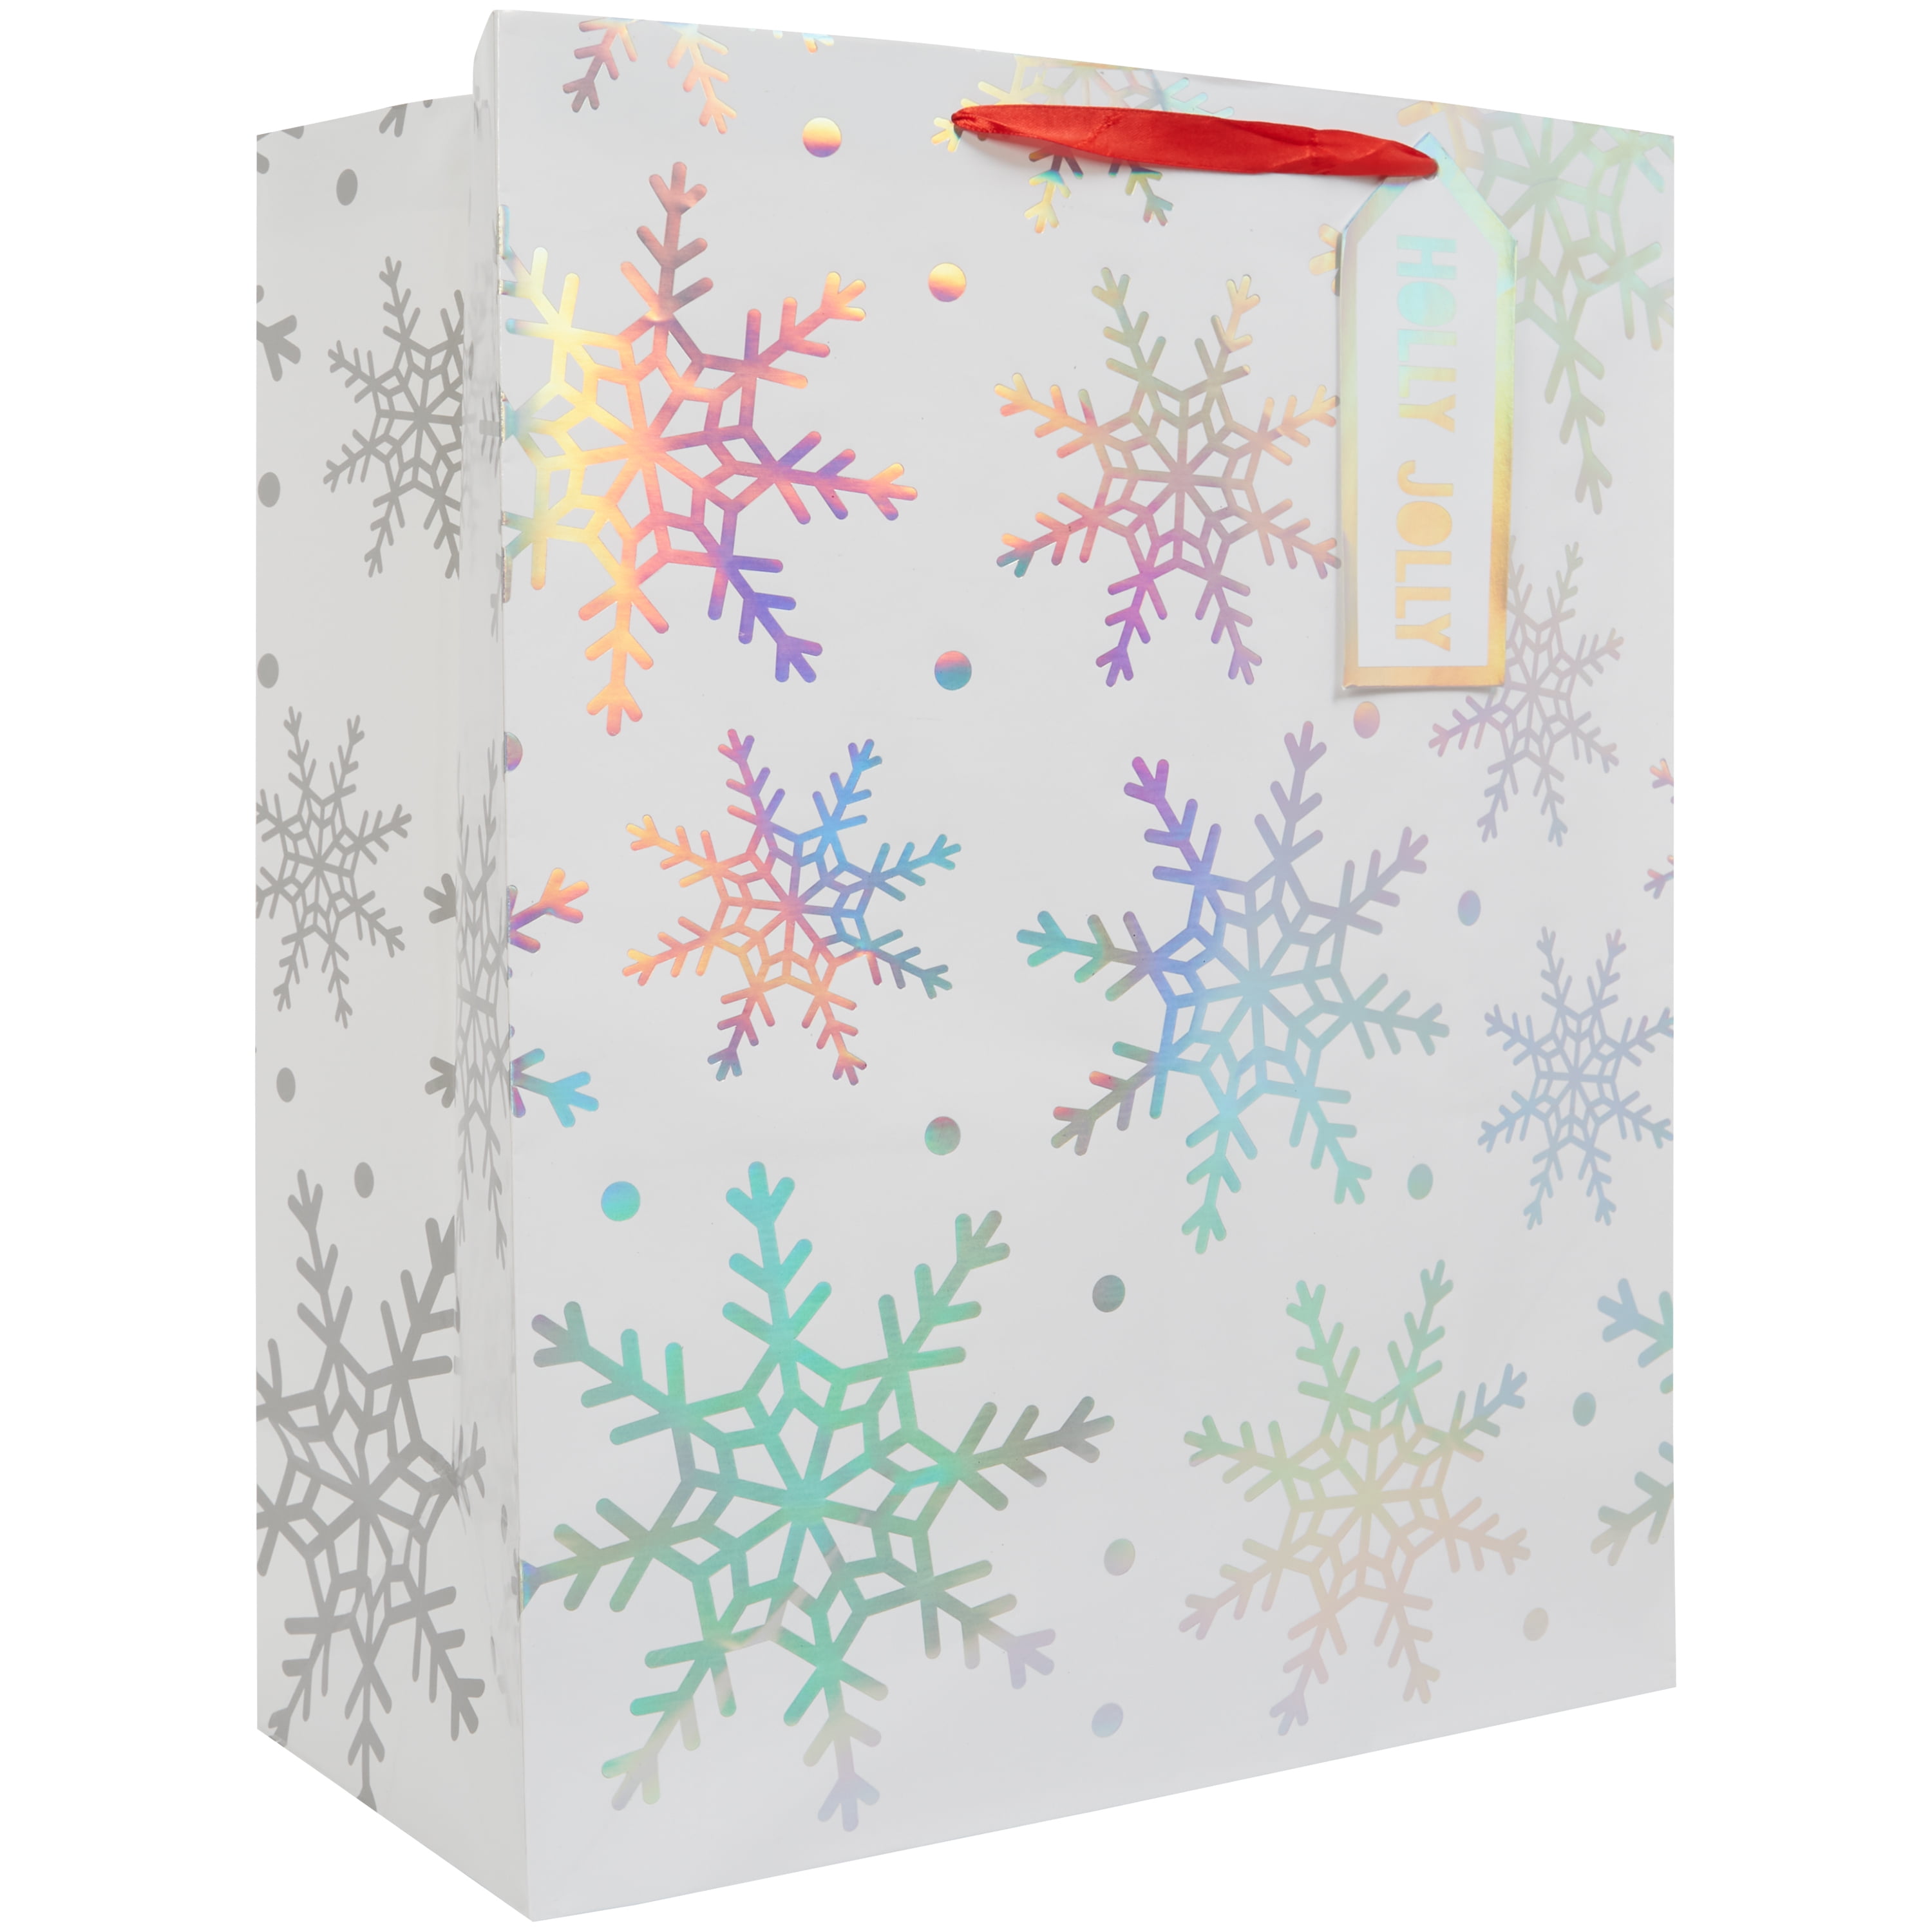 Happy Holidaze Holographic Christmas Favor Bags Your store is not eligible  for the new catalog experience Some of your products, categories and/or  options are not compatible. Learn how to prepare your store